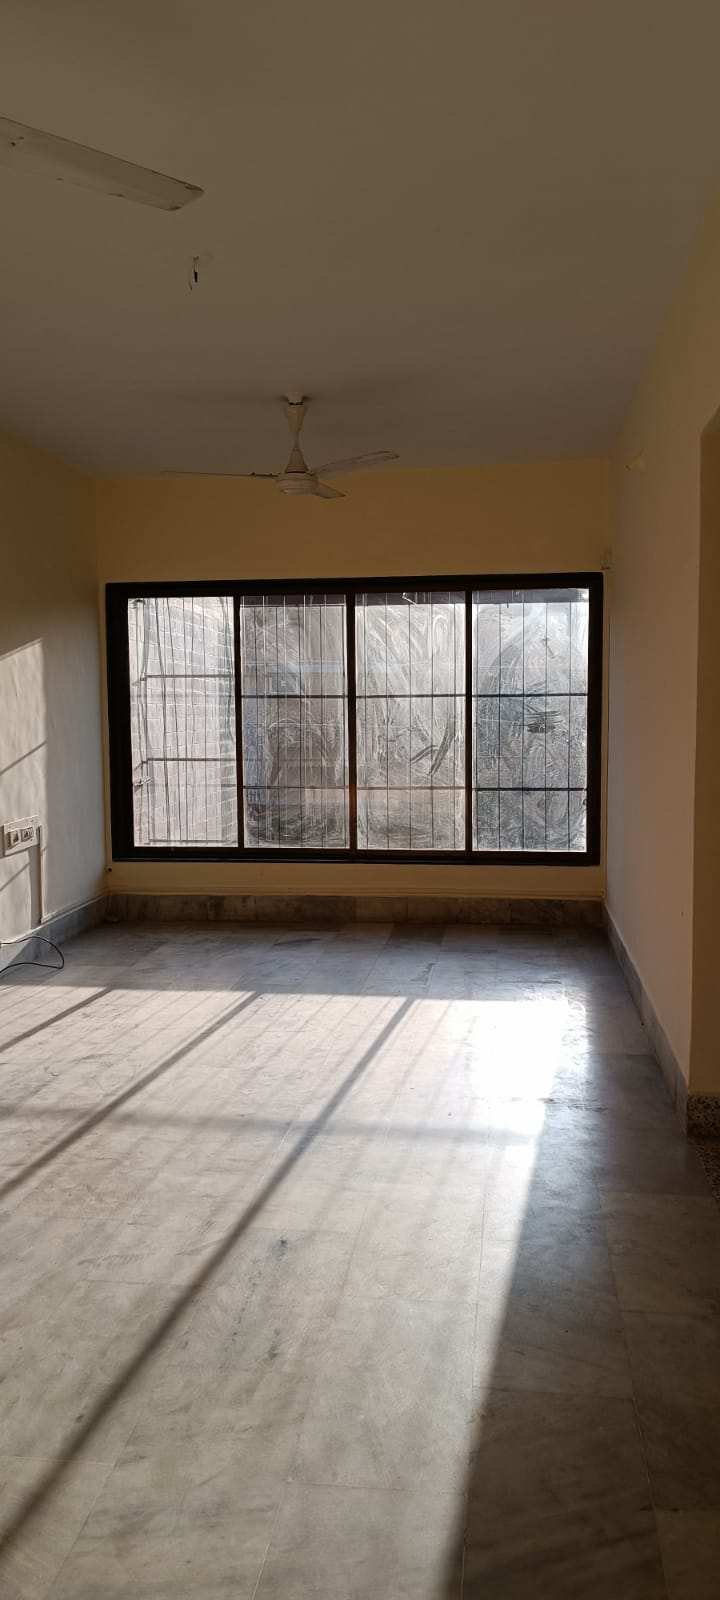 2BHK Well-Ventilated Apartment on Rent